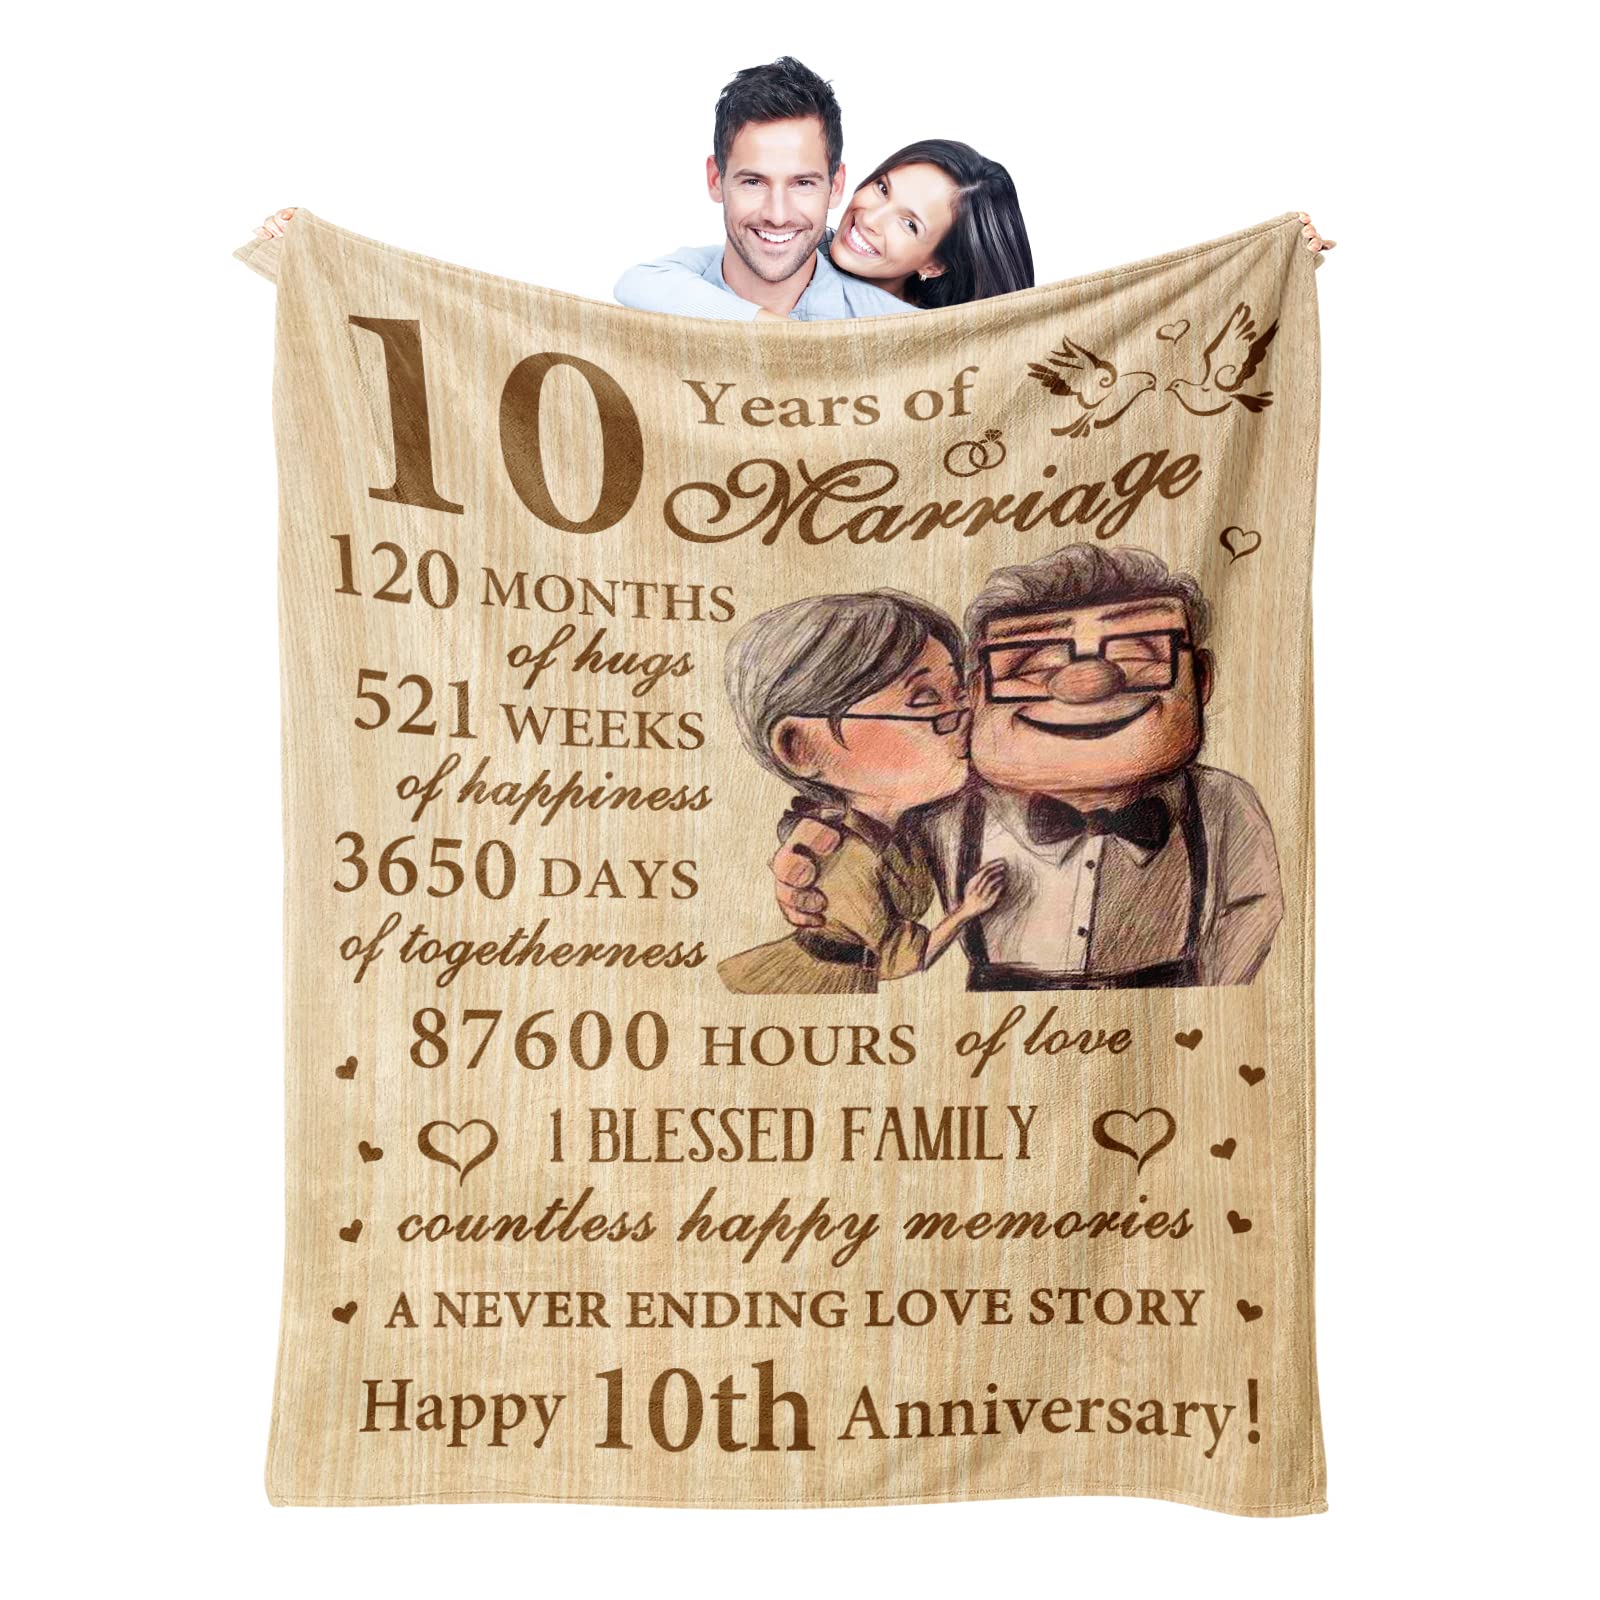 Neuturs 20th Anniversary Blanket Gifts for Him, 20th Anniversary Wedding Gifts for Wife Couple, Gifts for 20th Anniversary, 20 Year Anni